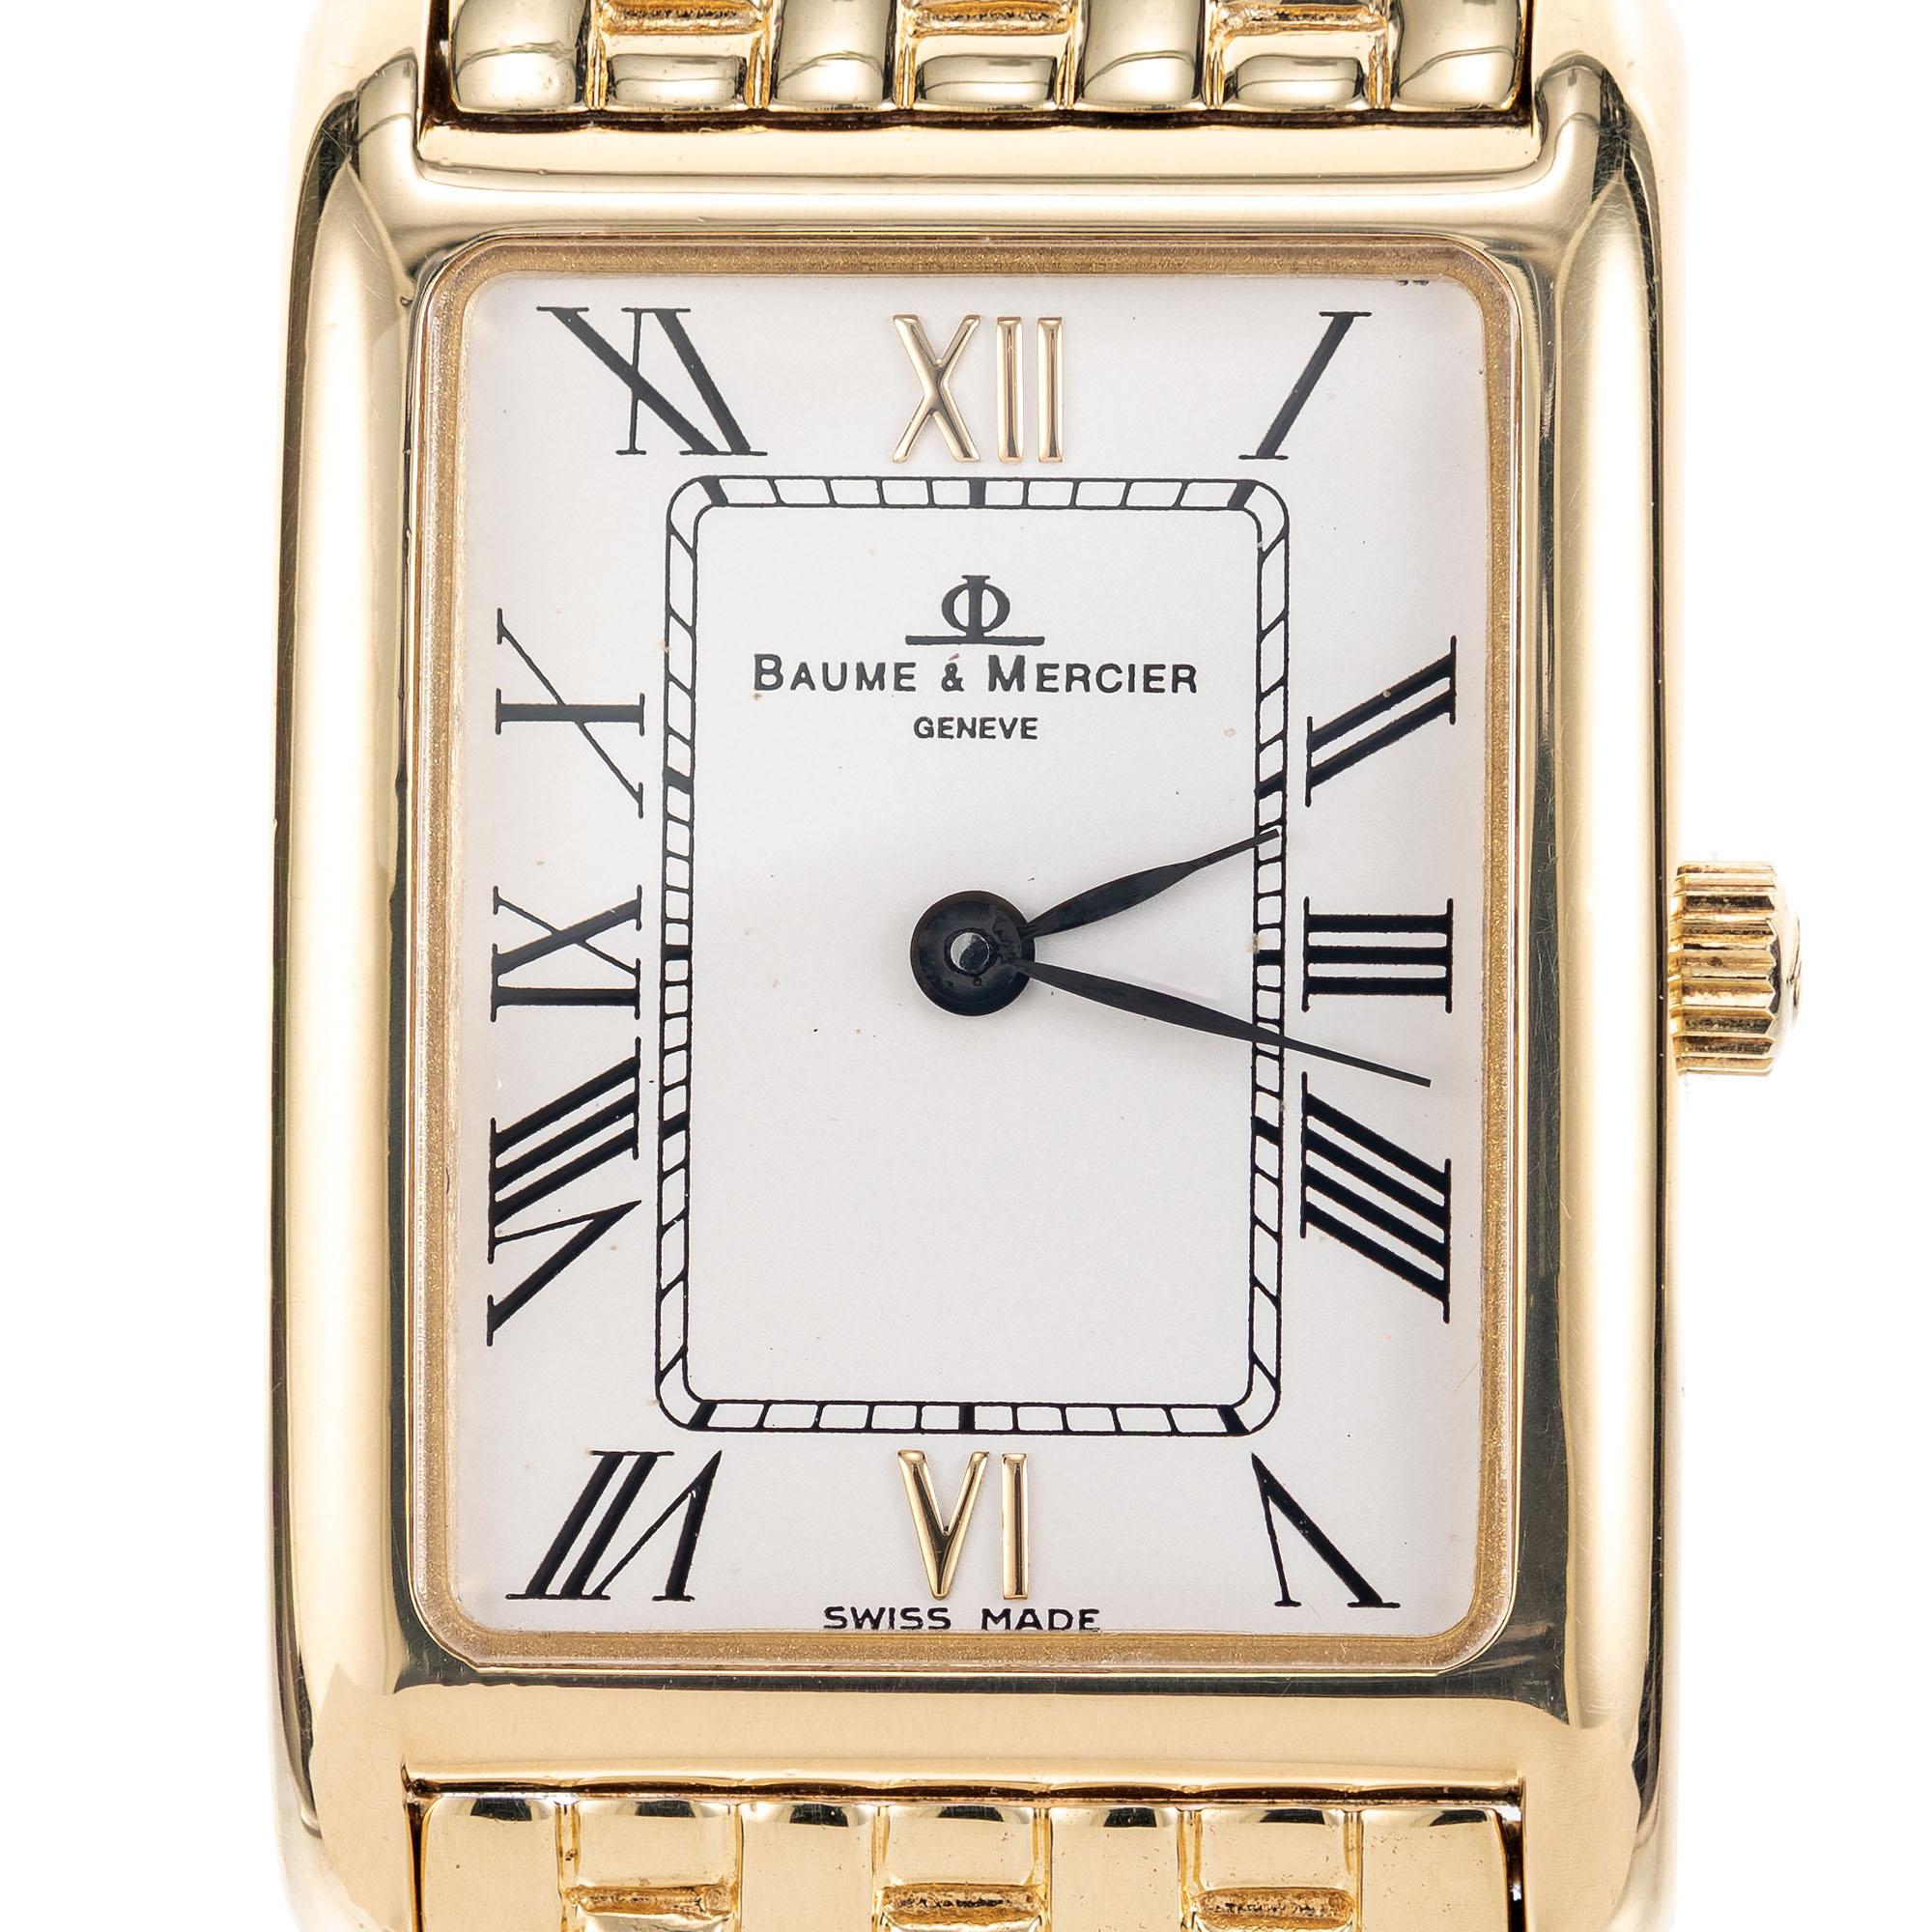 Baume & Mercier quarts tank wristwatch, 18k yellow gold with Panther style band. White dial with roman numerals. 6.5 inches long.

18k yellow gold
Length: 6.5 inches
Case length: 28.49mm
Case width: 19.59mm
Band width at case: 15mm
Case thickness: